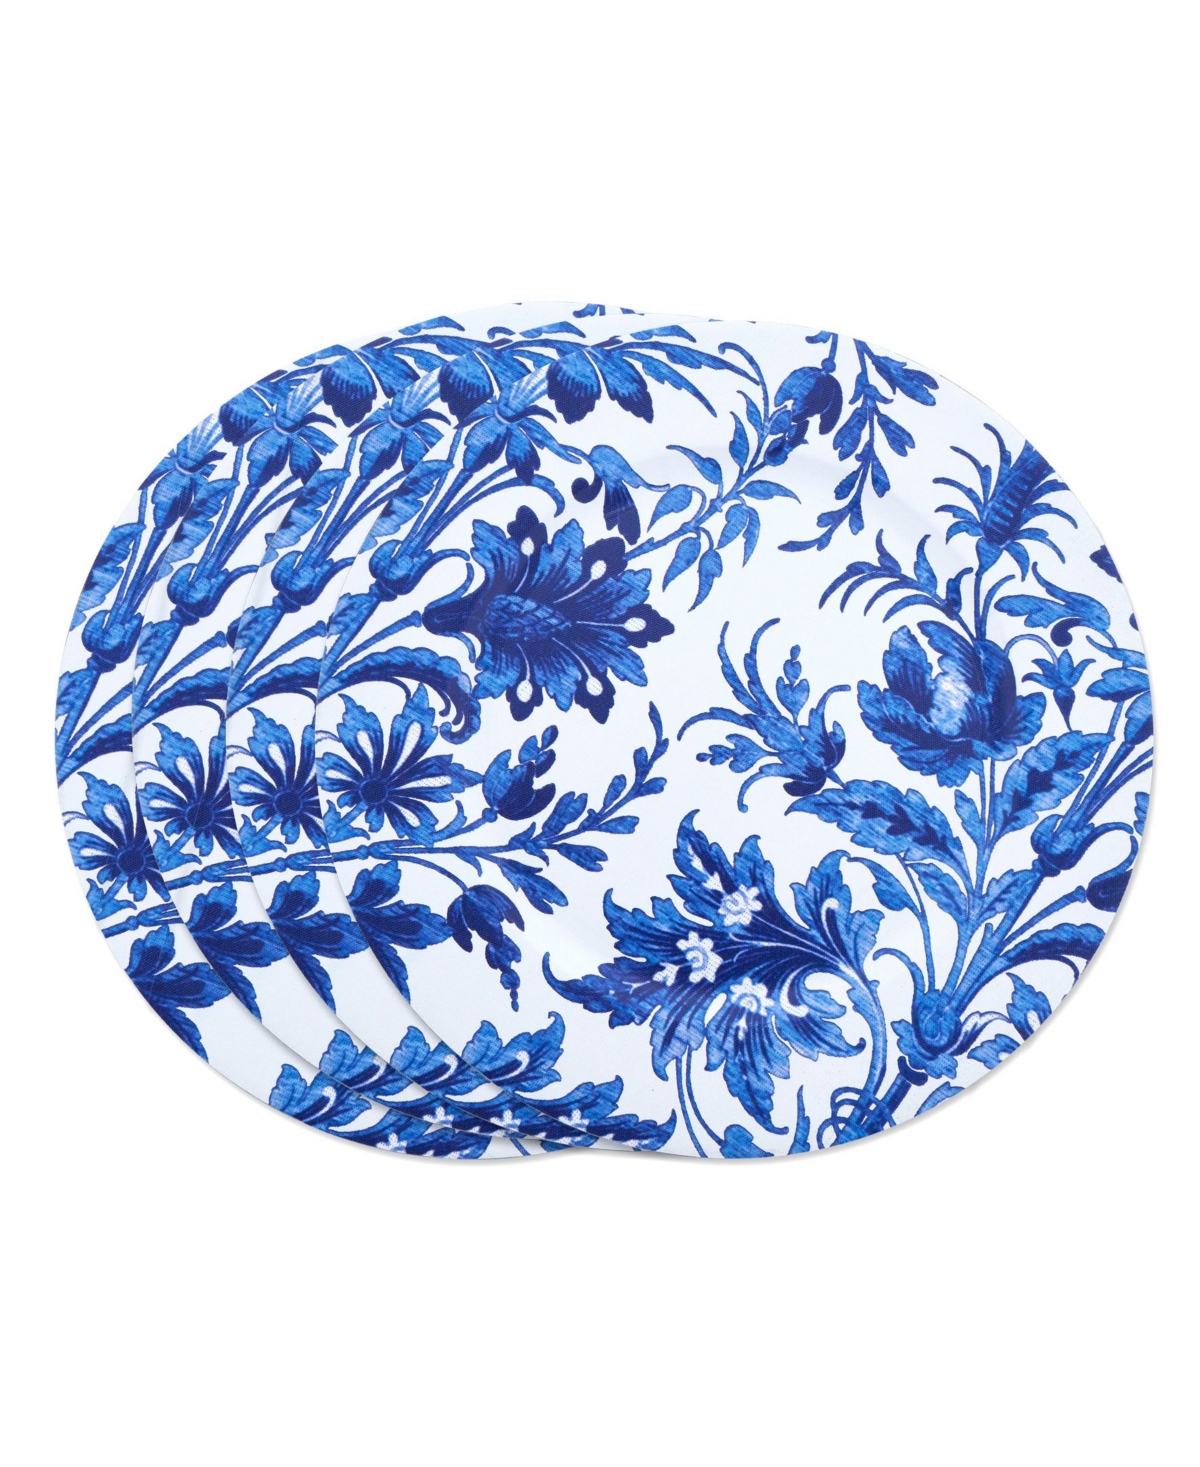 French Style Floral Print Decorative Charger Plate Set of 4 - Sapphire